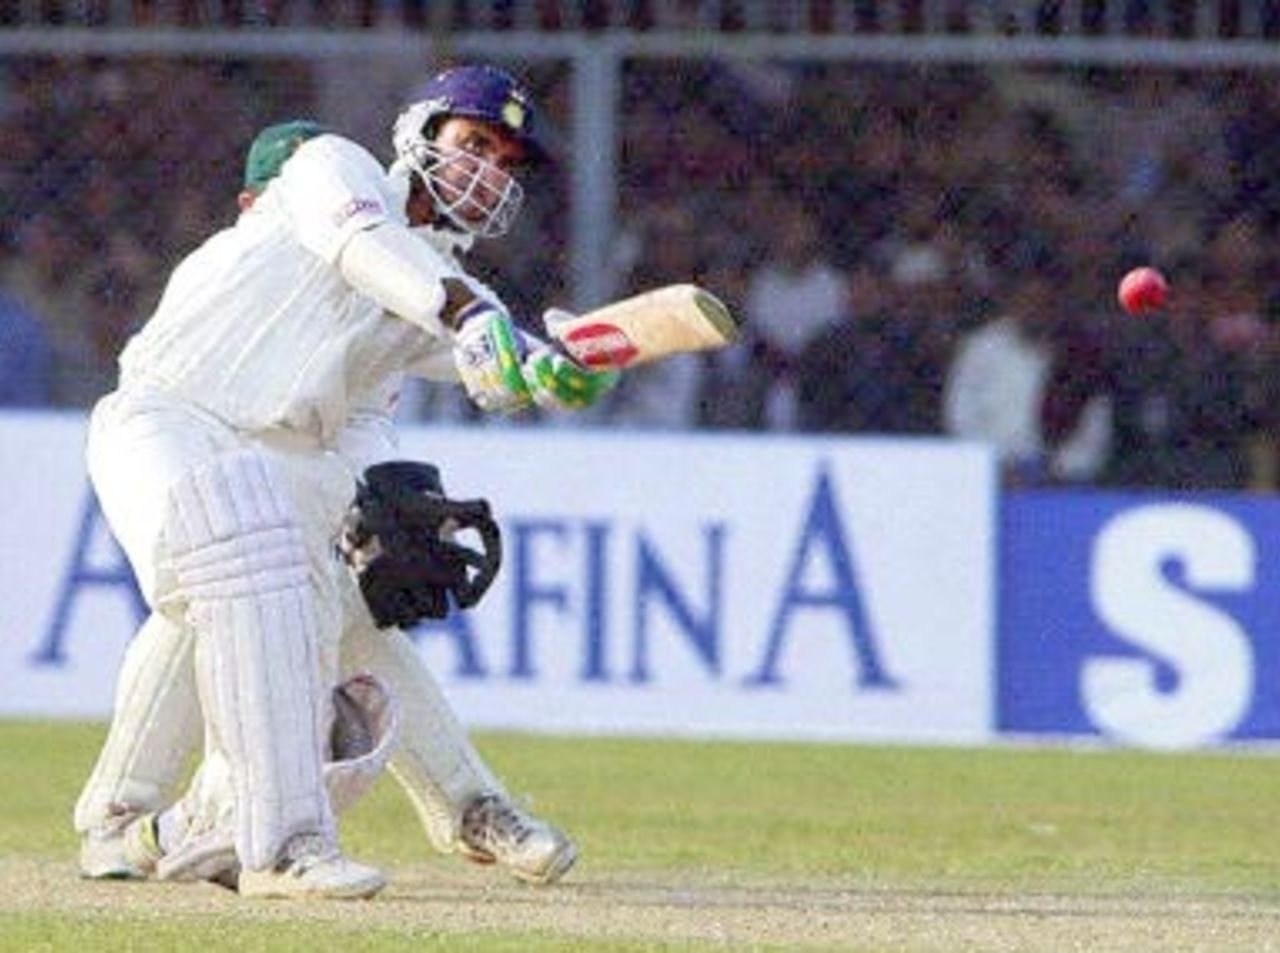 Indian skipper Saurav Ganguly hits a ball to boundary during the fourth one-day cricket match against Zimbabwe in Kanpur, 11 December 2000. India won the match by nine wicket to take the series.